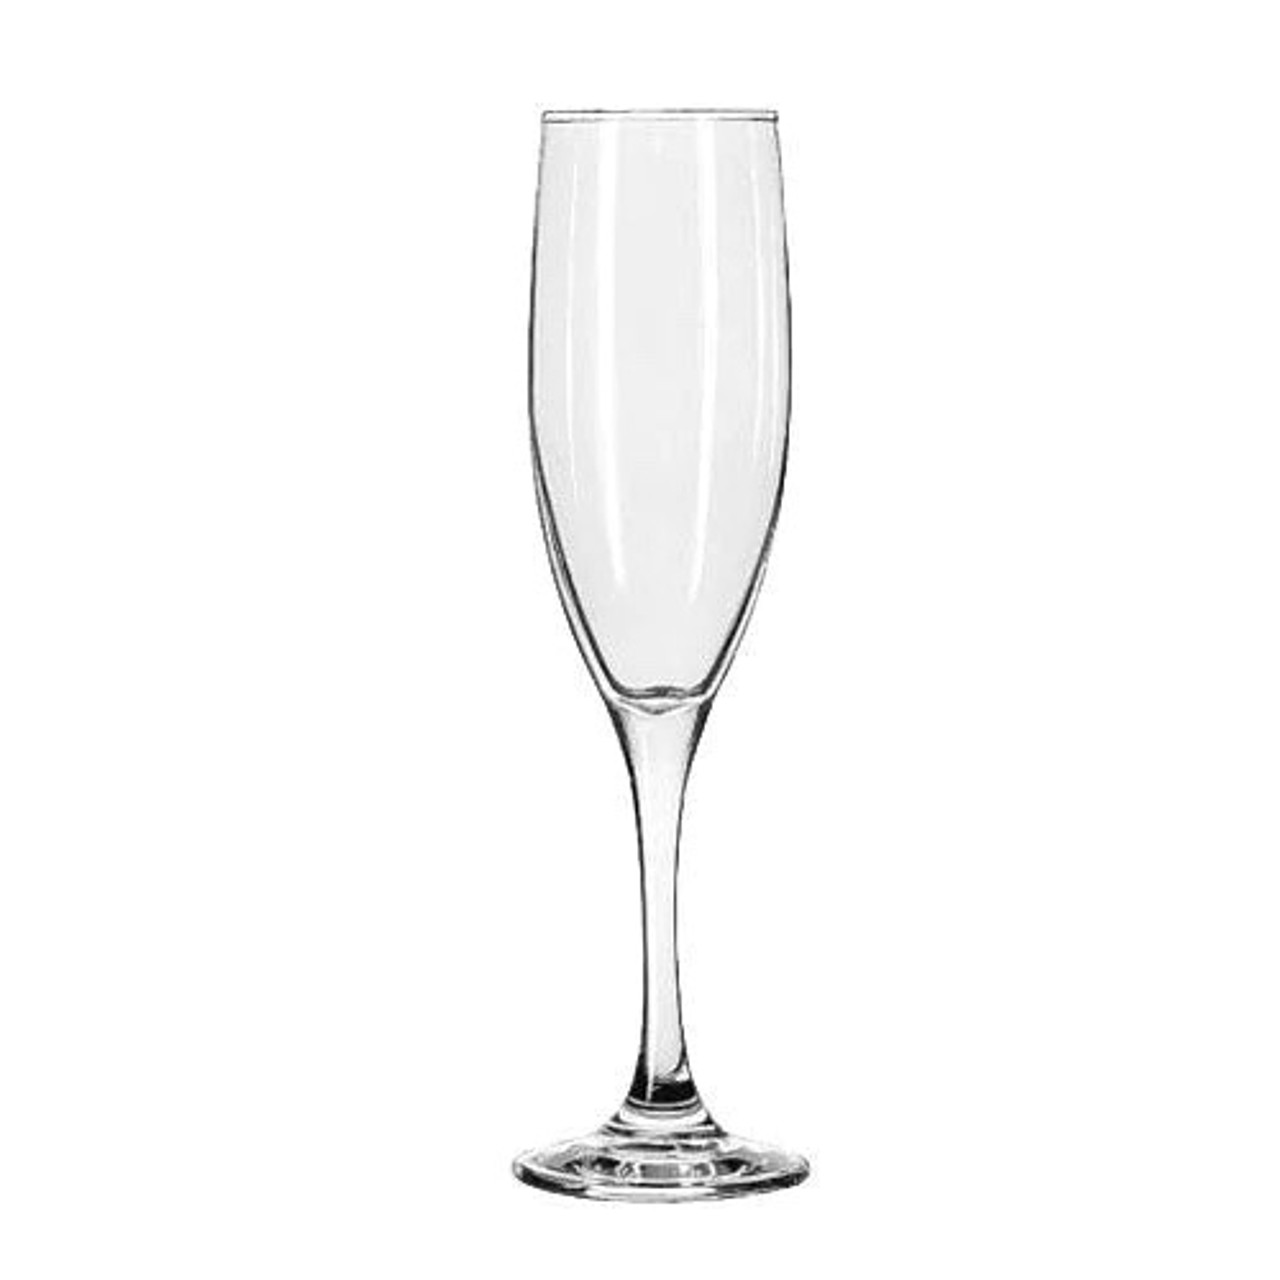 Libbey 6-Ounce Clear Domaine Champagne Flute Glass, Set of 12